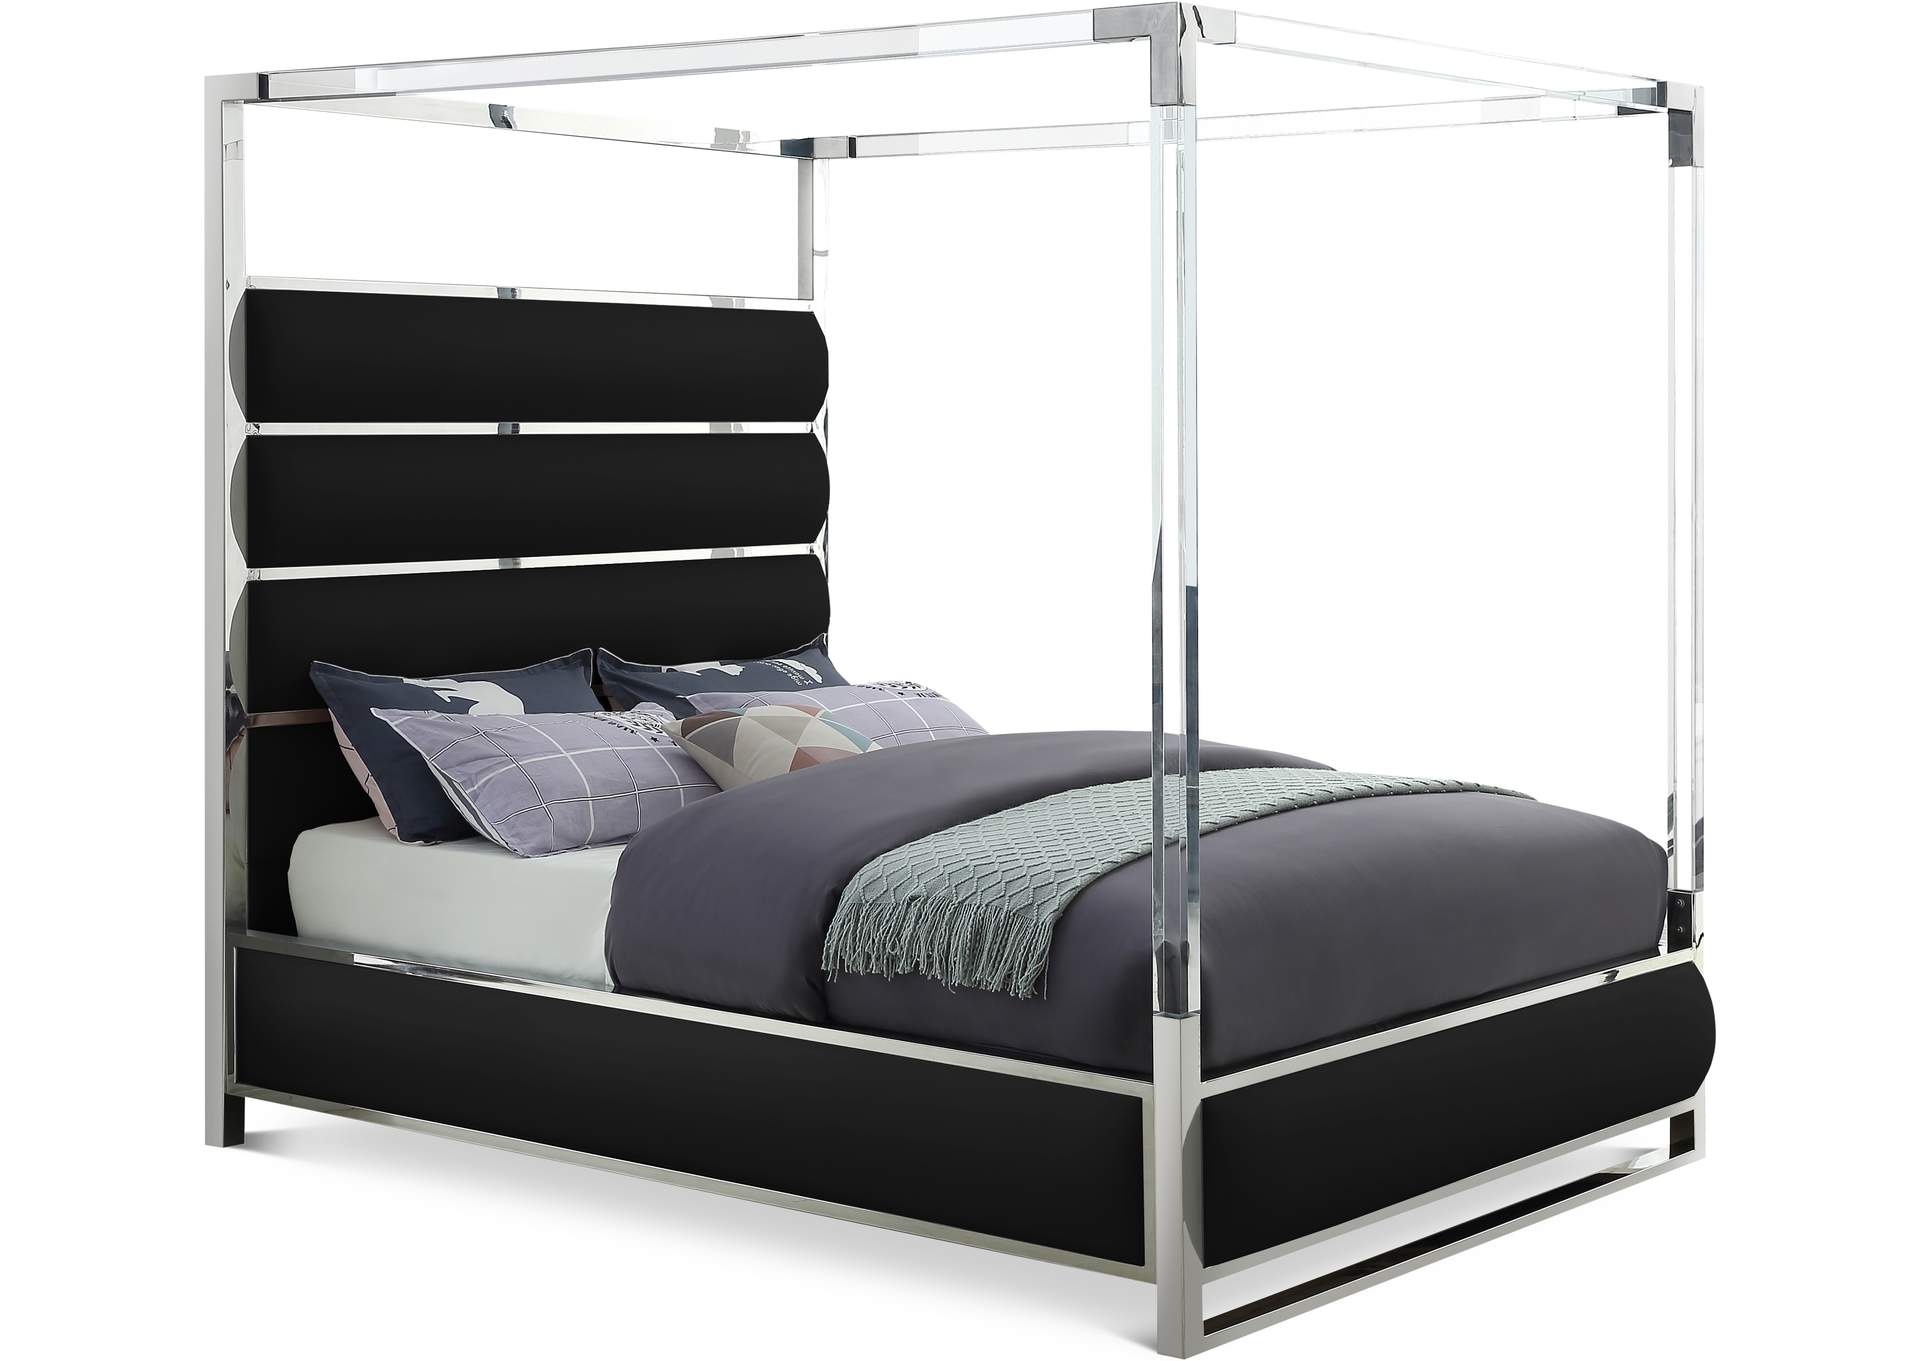 Encore Black Faux Leather King Bed 4, Faux Leather King Bed